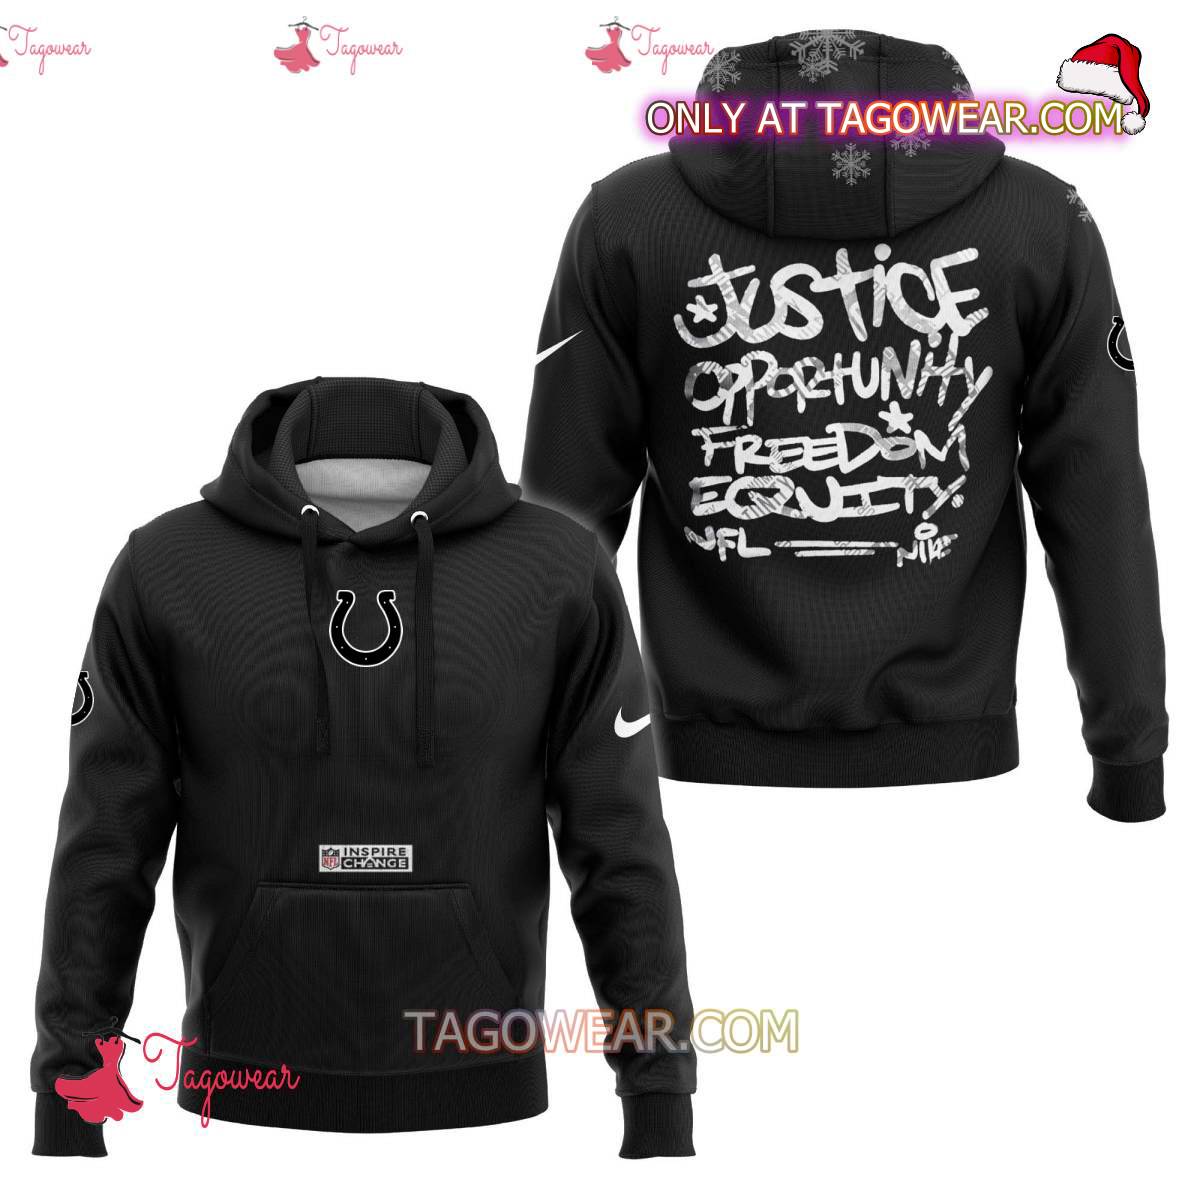 Indianapolis Colts NFL Inspire Change Justice Opportunity Equality Freedom Hoodie